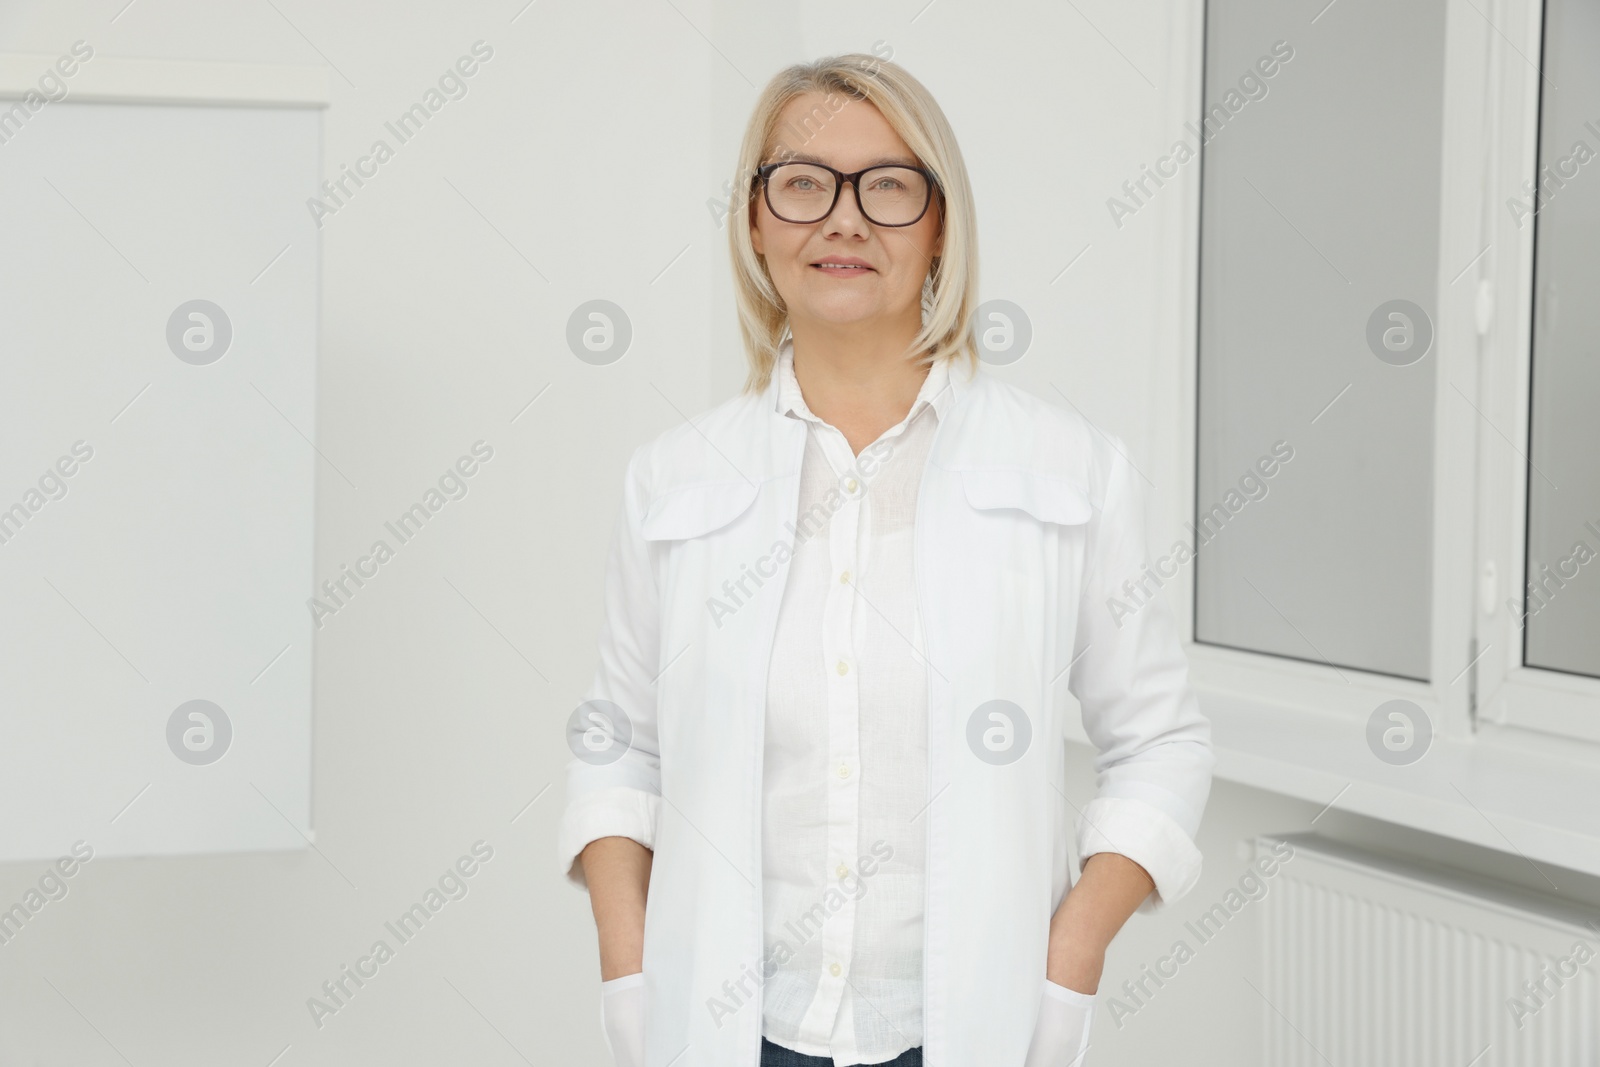 Photo of Professional doctor wearing medical coat near flipchart board in clinic